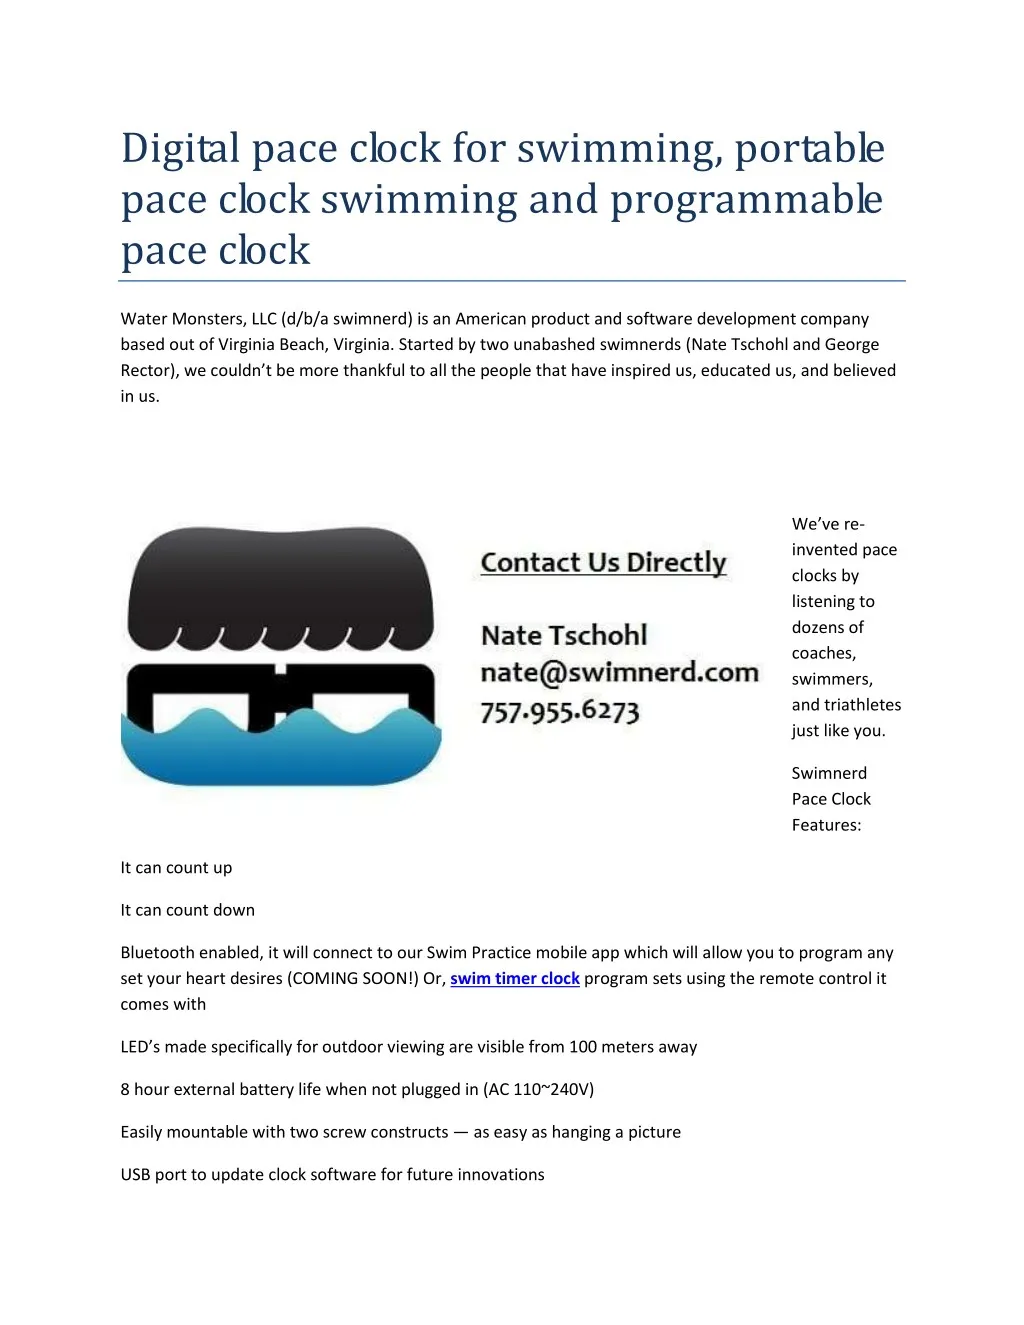 digital pace clock for swimming portable pace